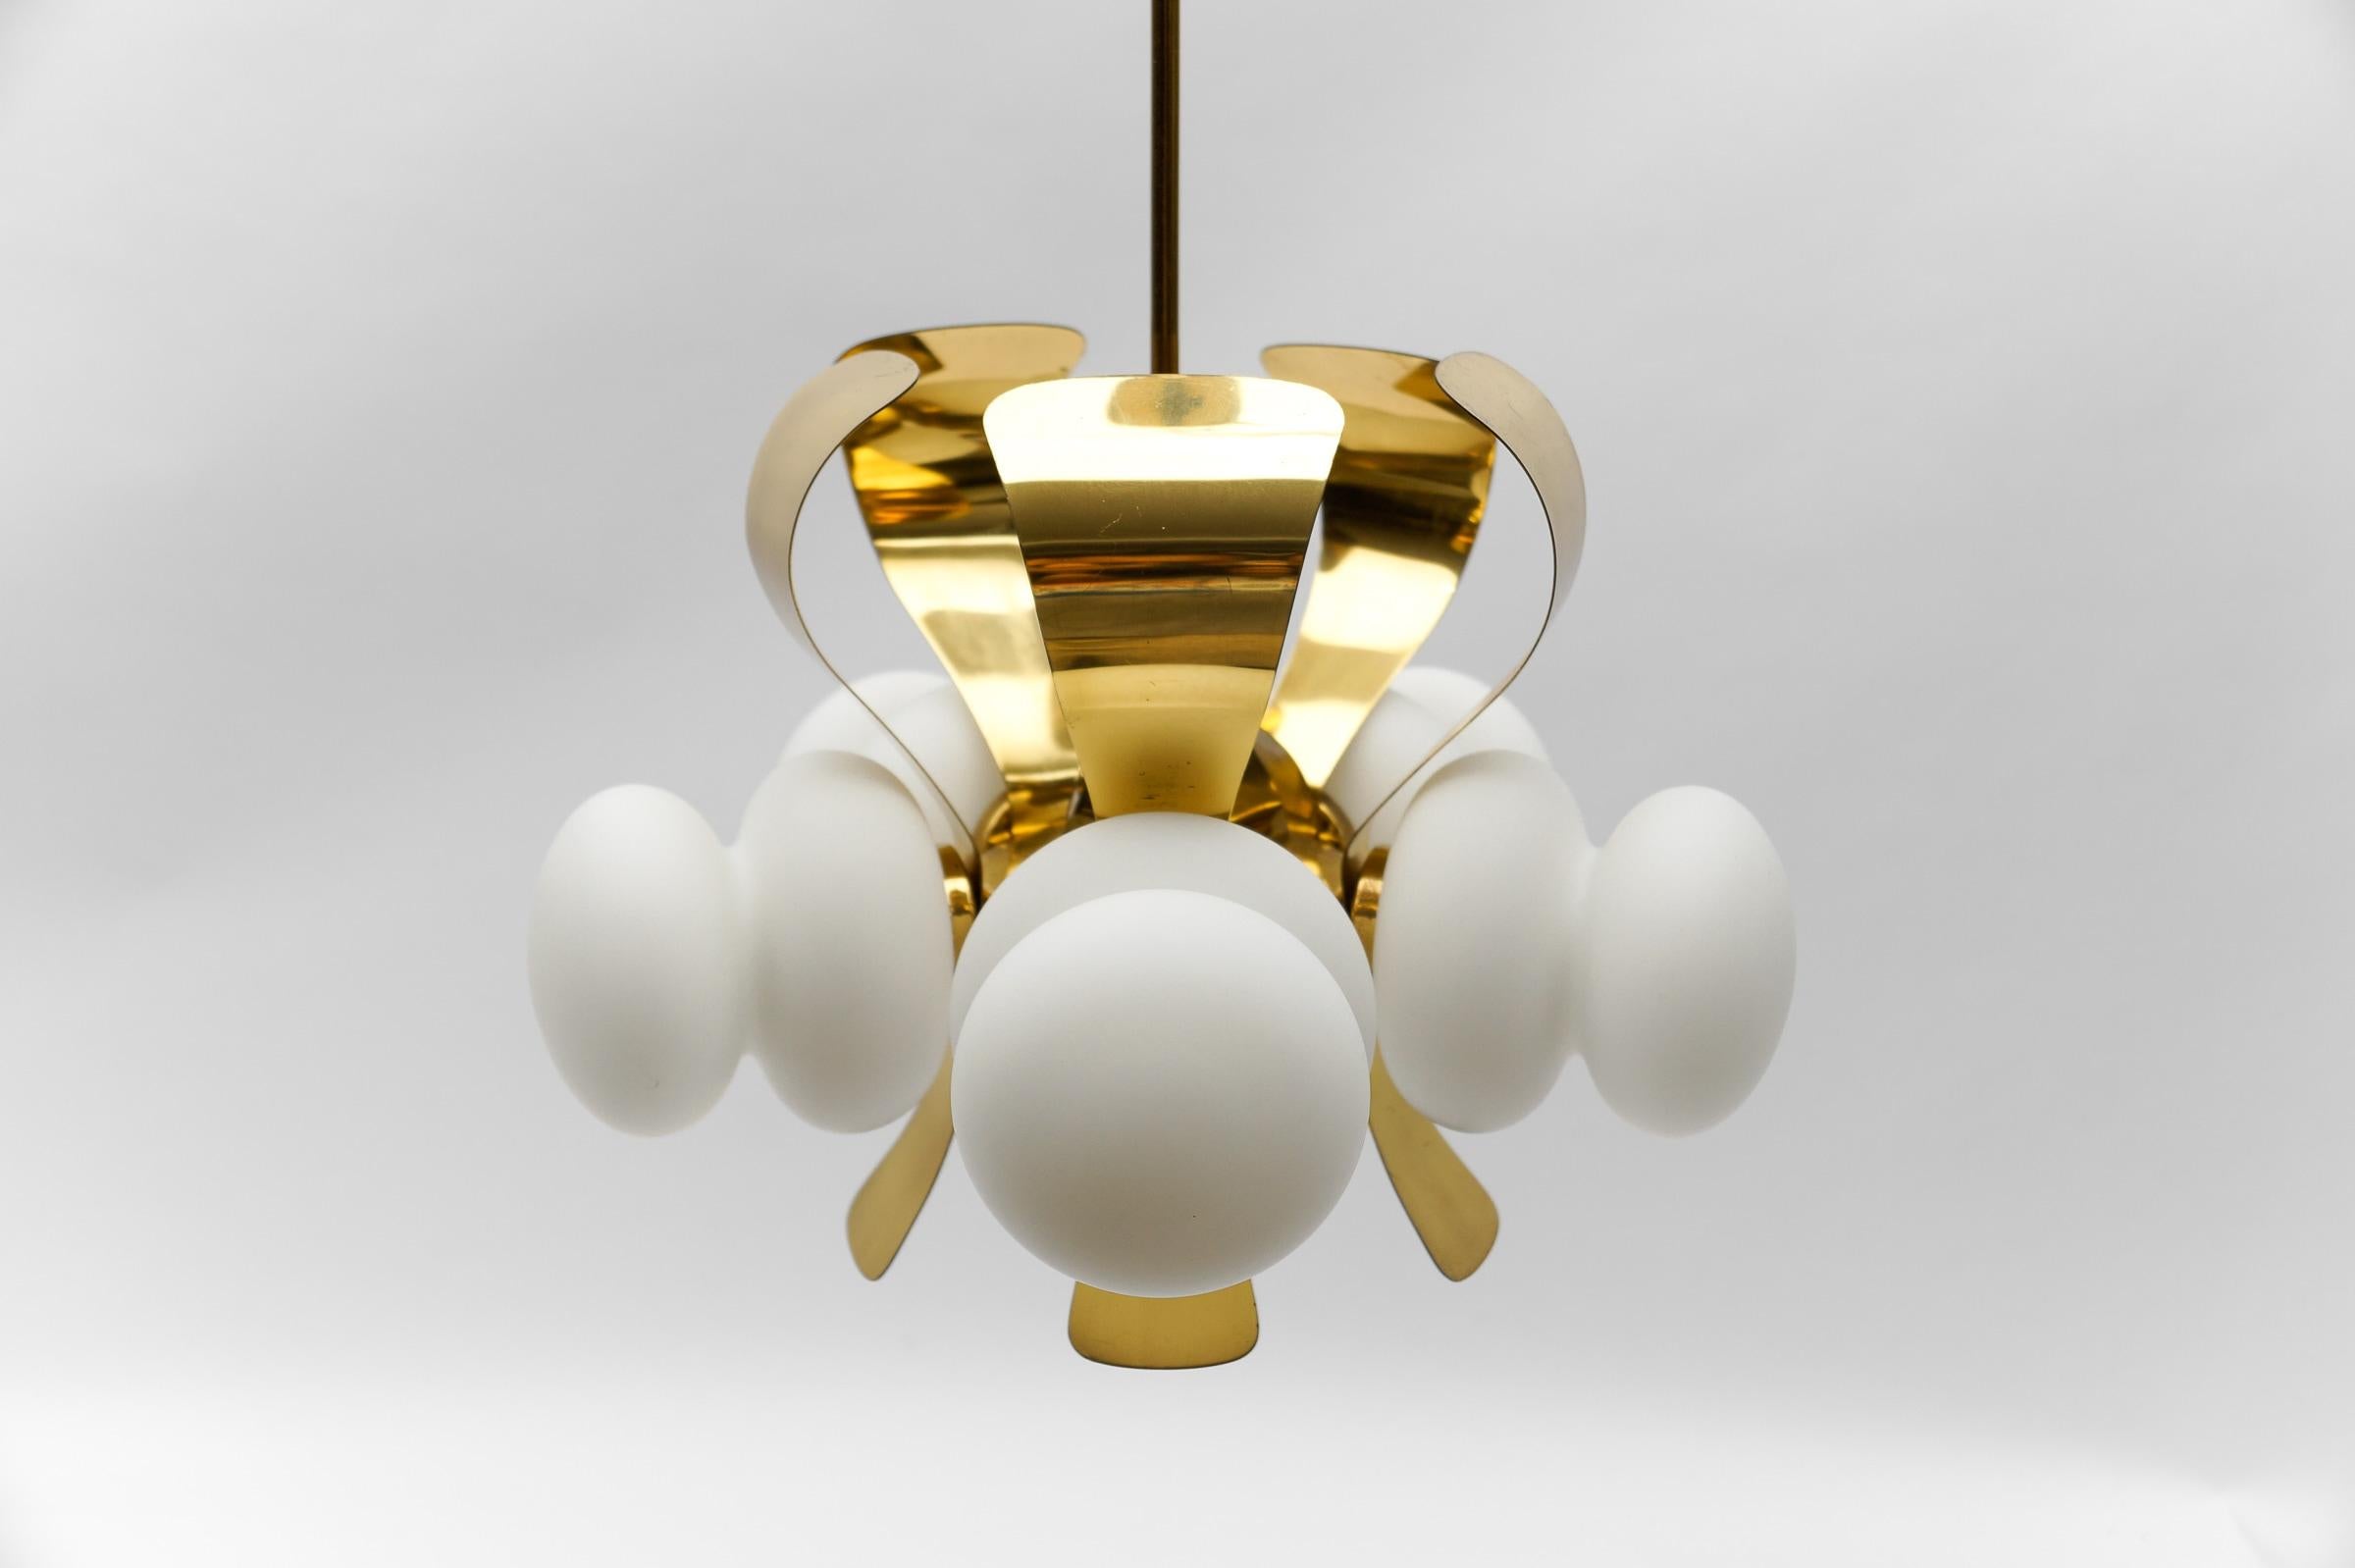 Mid-20th Century Very Rare Mid-Century Modern 5-Arm Orbit Lamp in Gold and Opaline Glass, 1960s For Sale